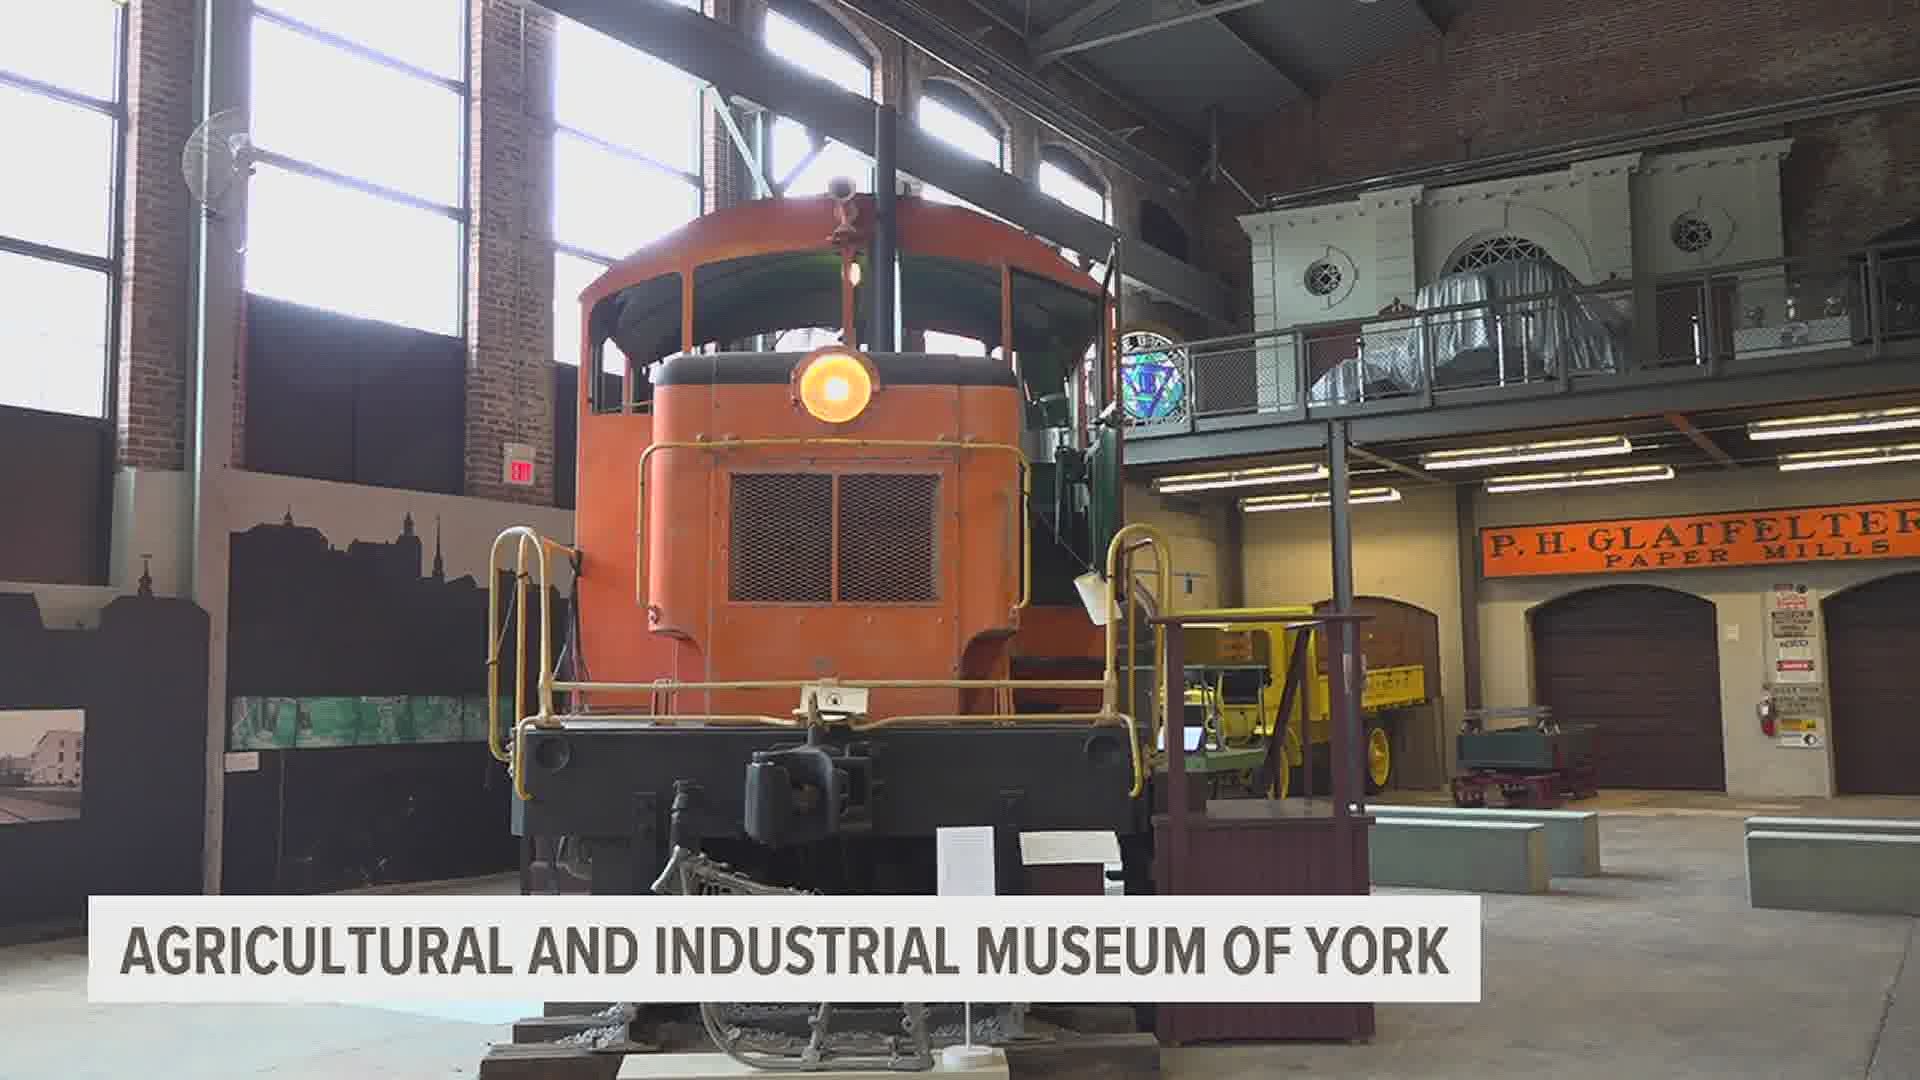 Featuring everything from 18th century Conestoga Wagons to 20th century airplanes, you can check out the museum into the past in York.